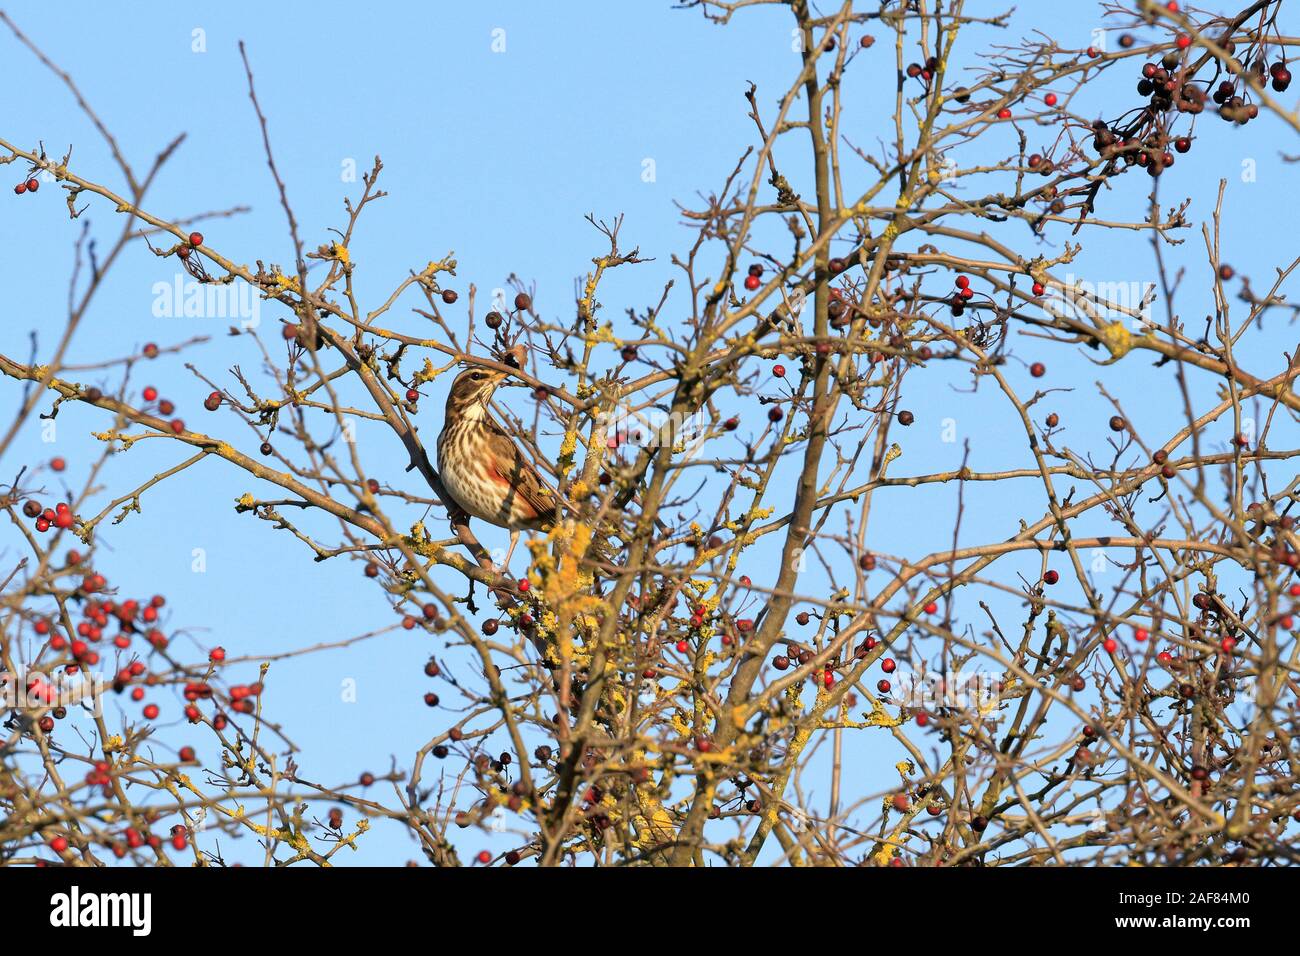 Redwing, Turdus iliacus, UK conservation red list bird, in a Hawthorn tree feeding on haws in winter, England, UK. Stock Photo